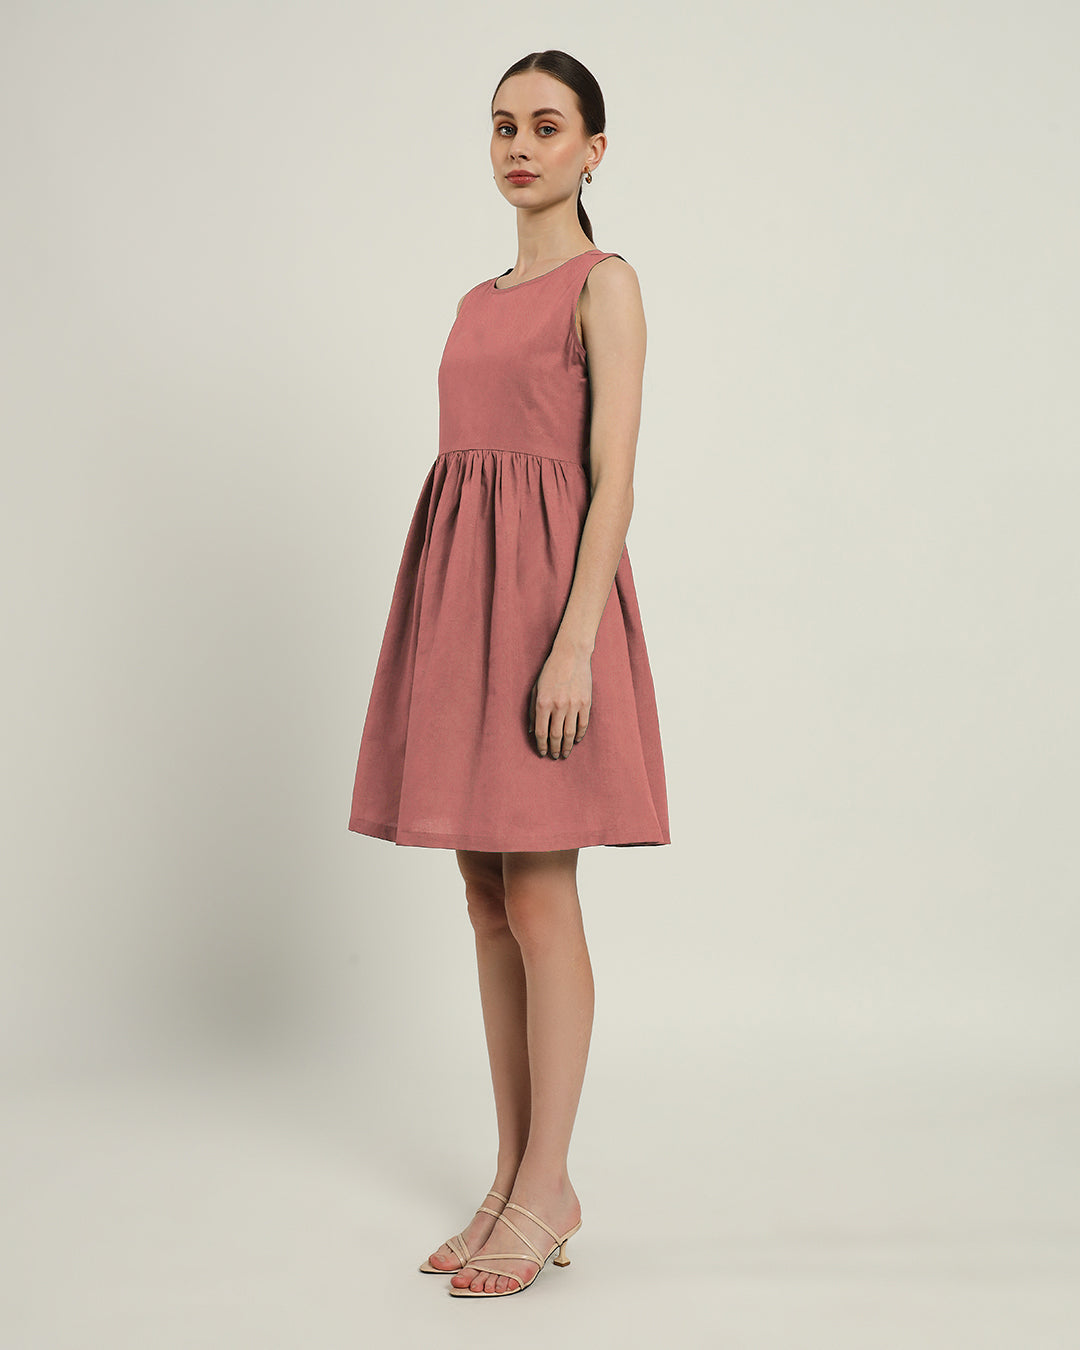 The Chania Ivory Pink Cotton Dress